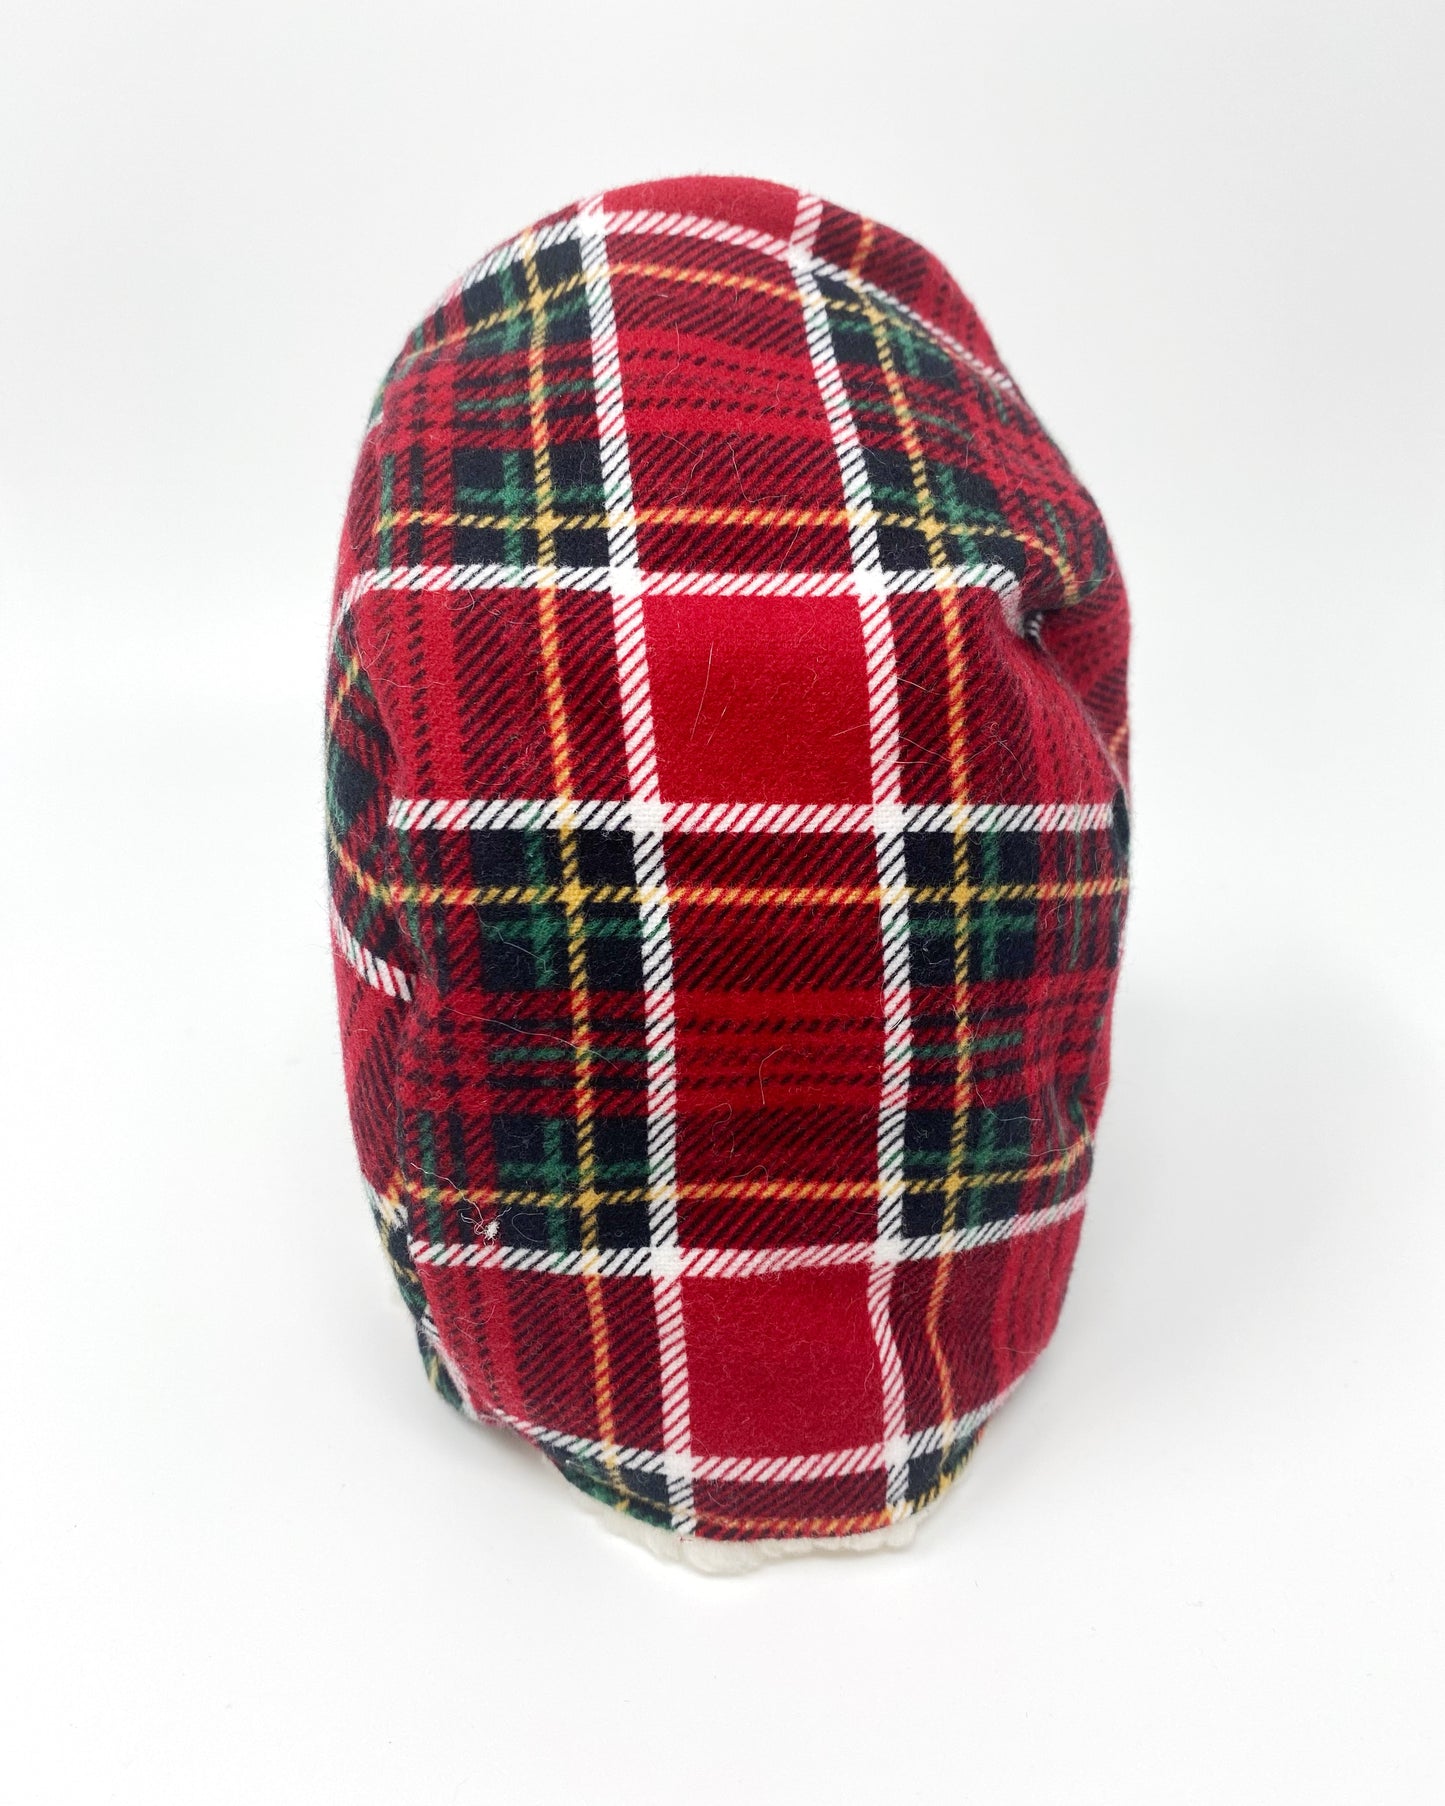 Houndie Hat | Classic Plaid with Sherpa Lining